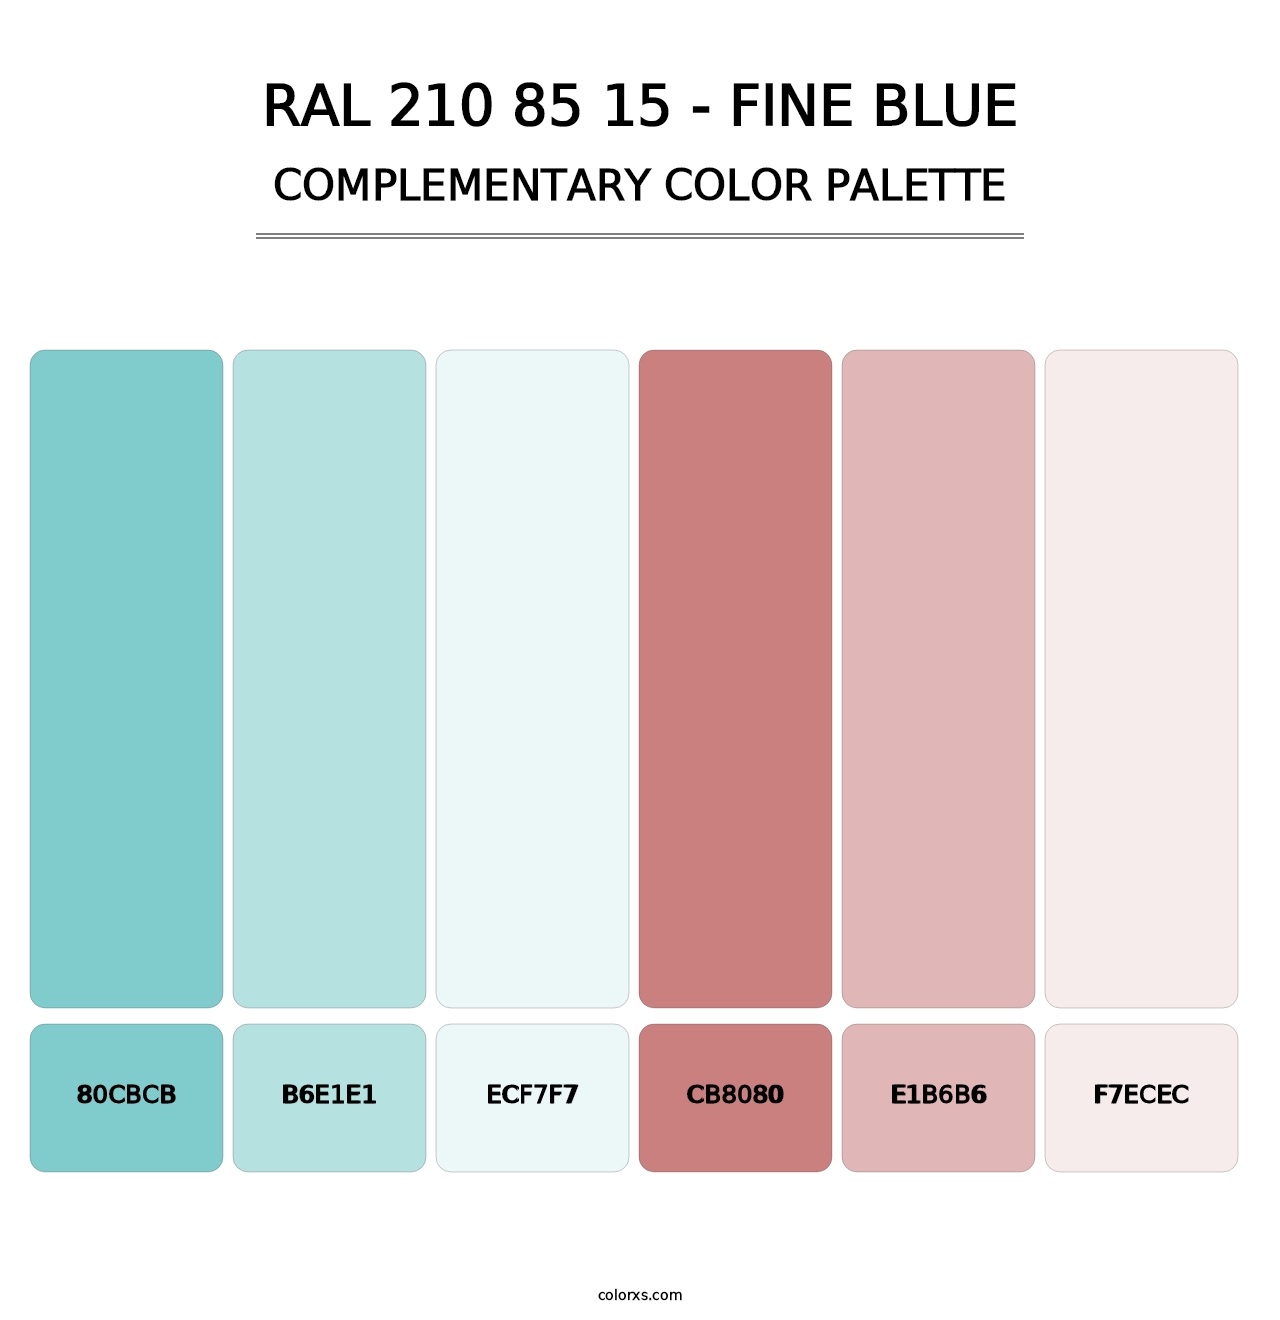 RAL 210 85 15 - Fine Blue - Complementary Color Palette